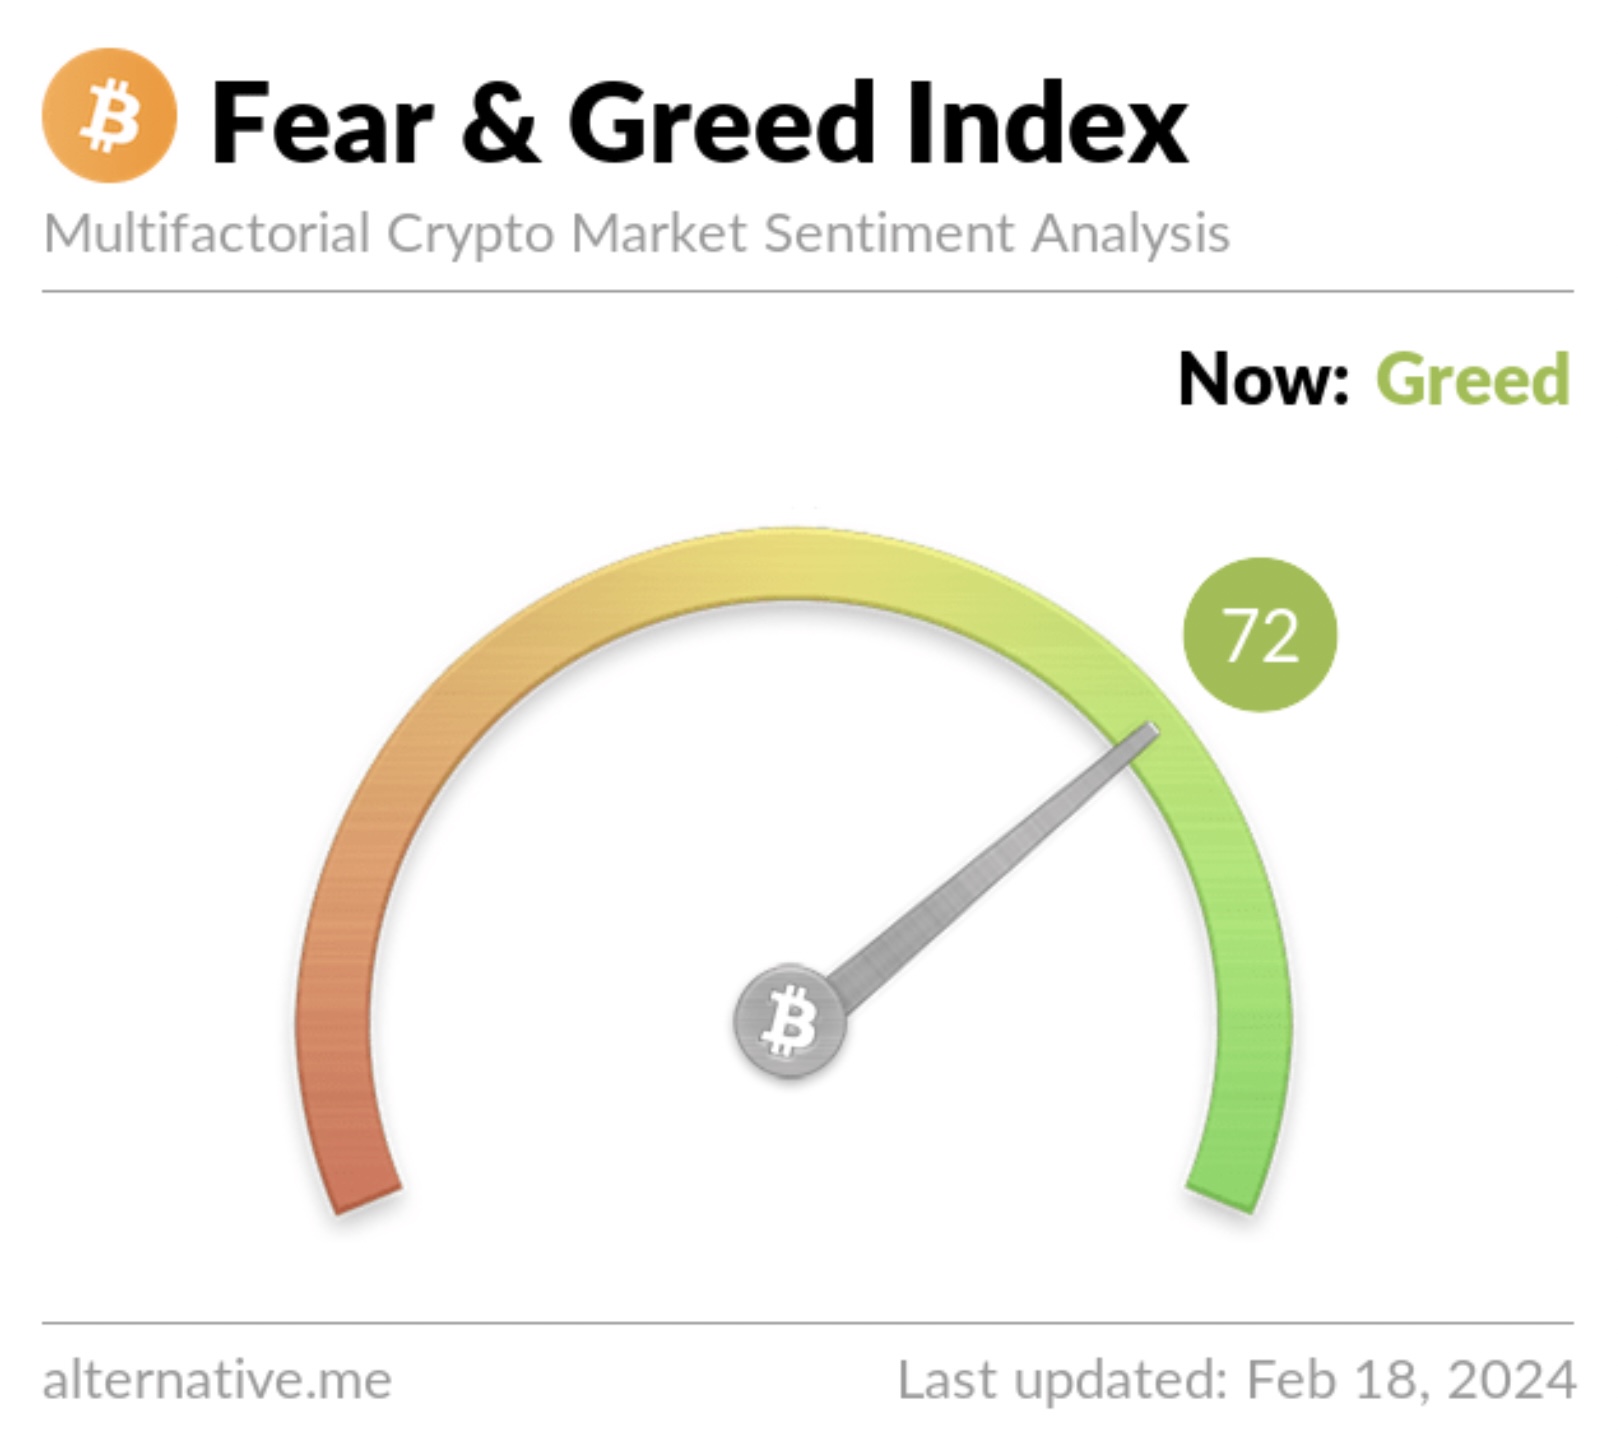 Crypto Fear & Greed Index as of Feb. 18, 2024